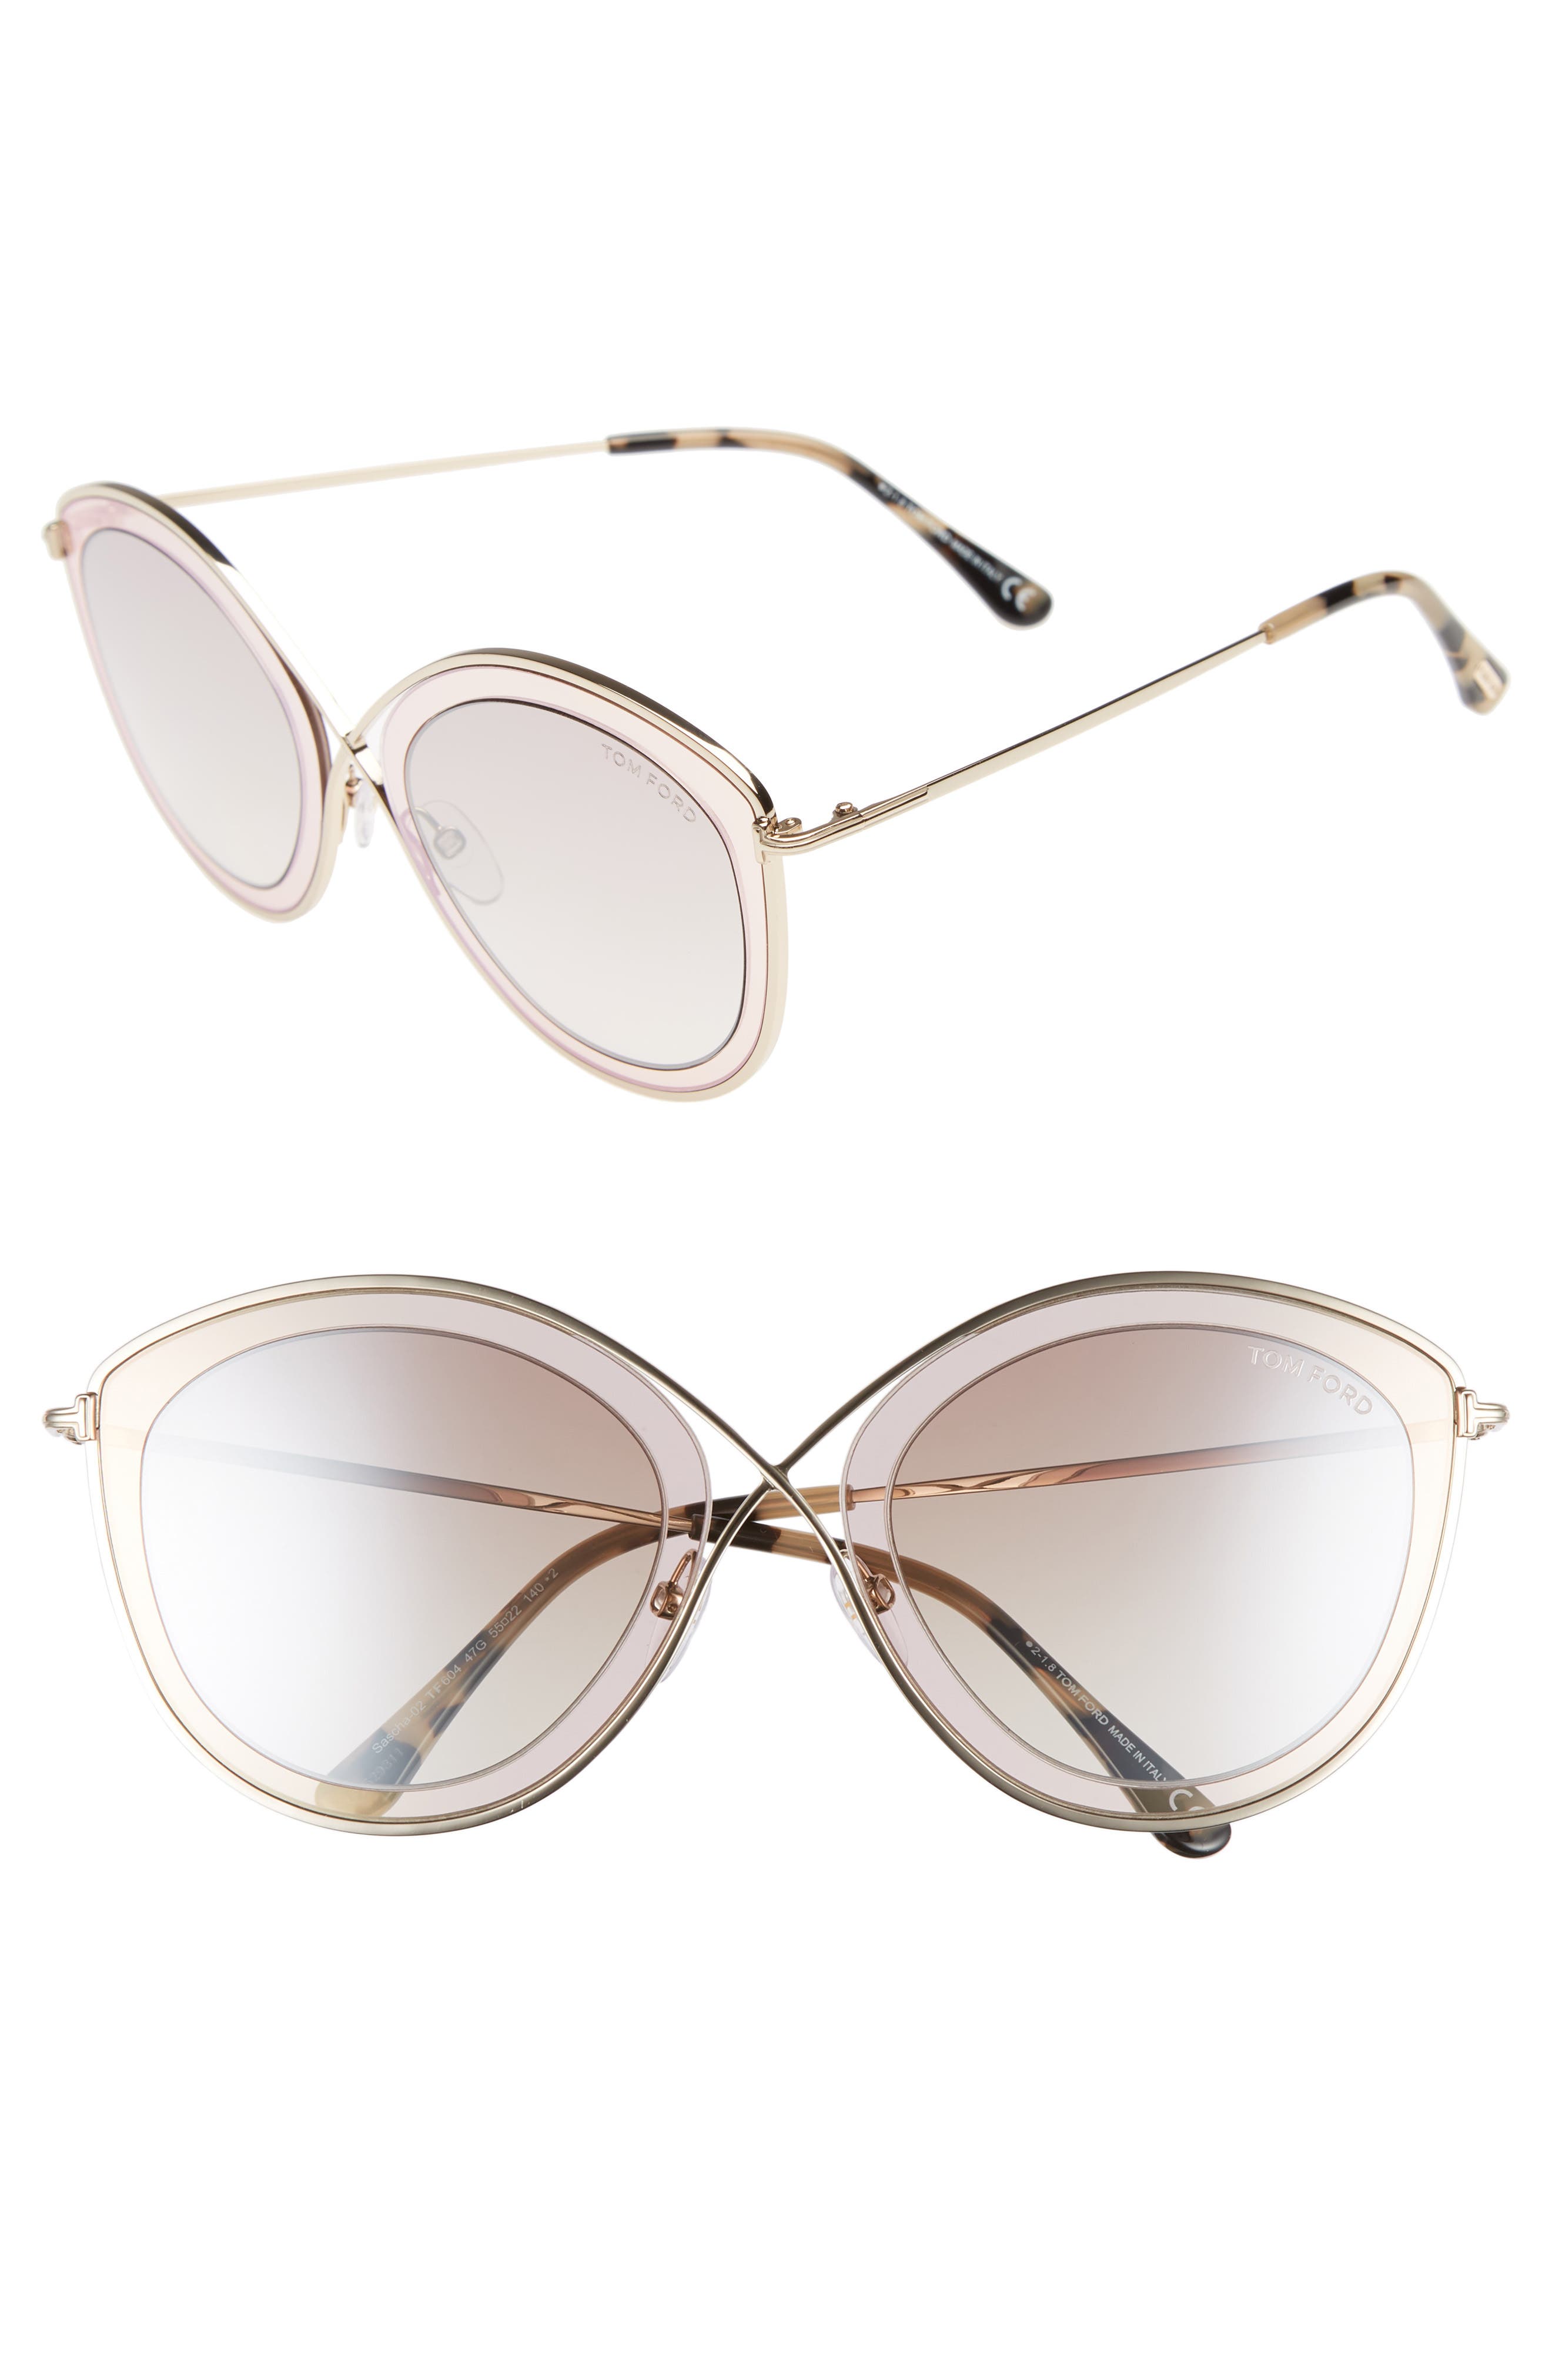 UPC 664689928873 product image for Women's Tom Ford Sascha 55Mm Butterfly Sunglasses - Light Brown/ Brown Mirror | upcitemdb.com